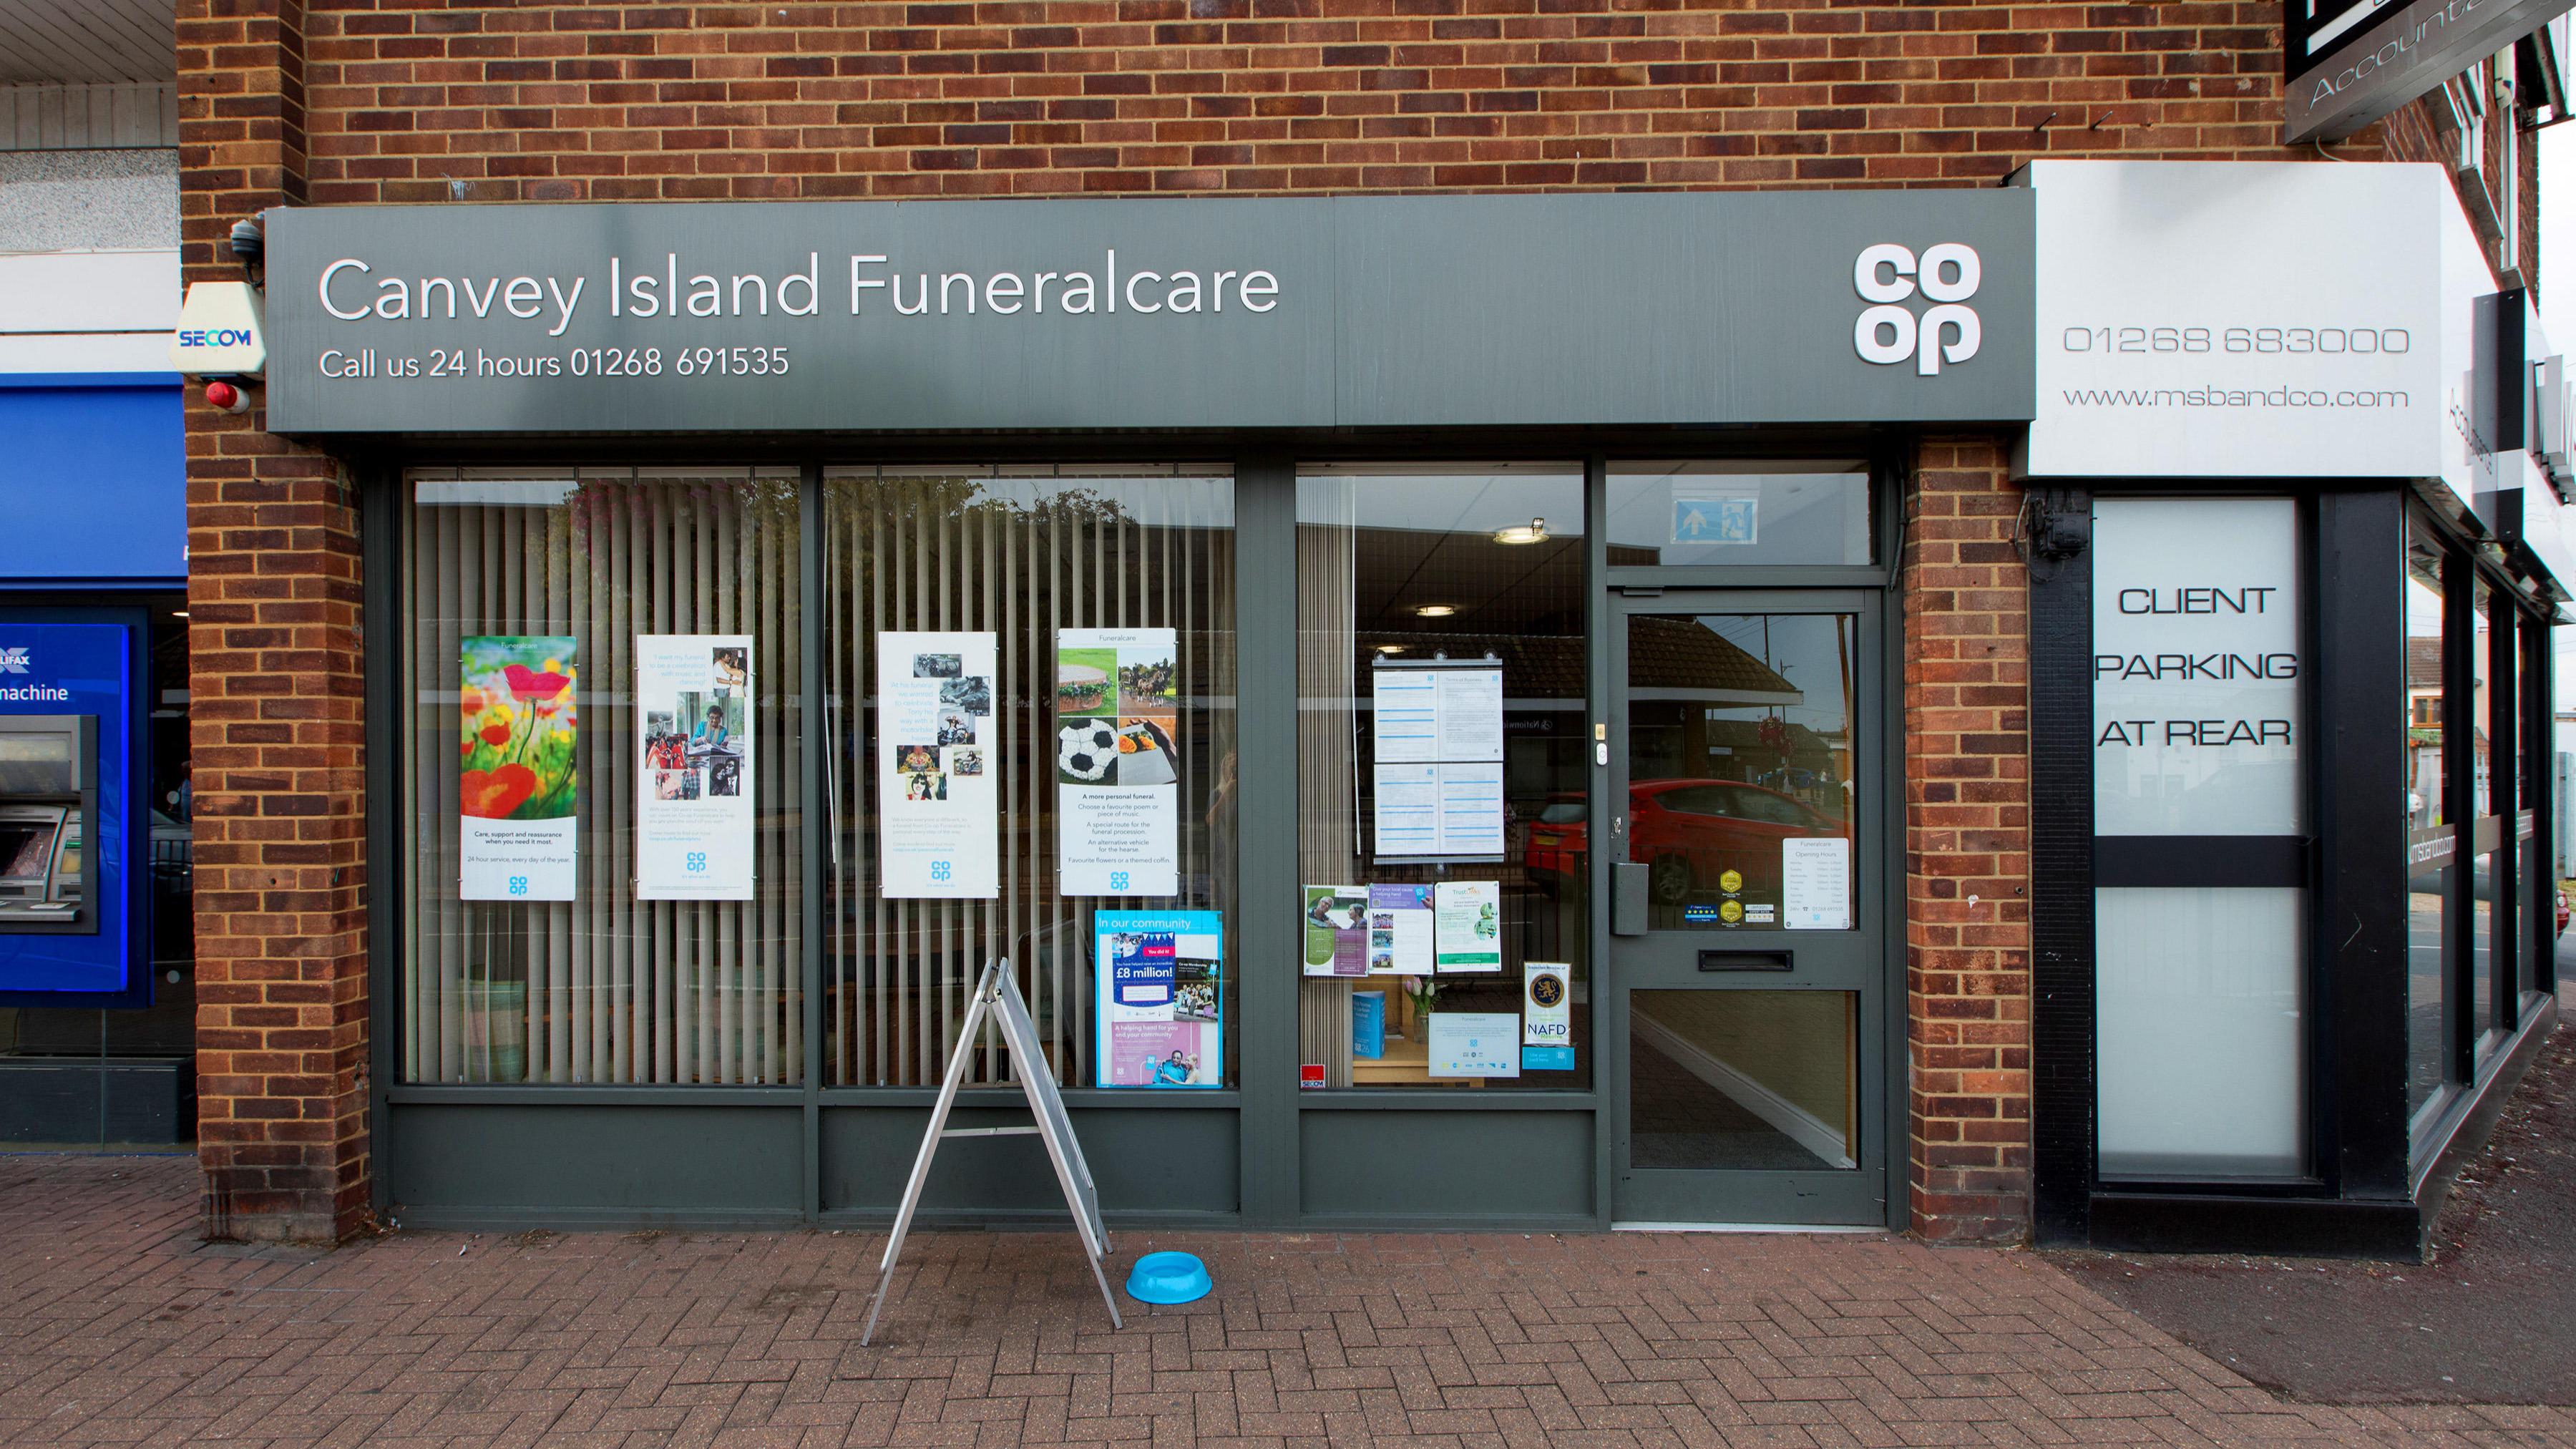 Images Canvey Island Funeralcare